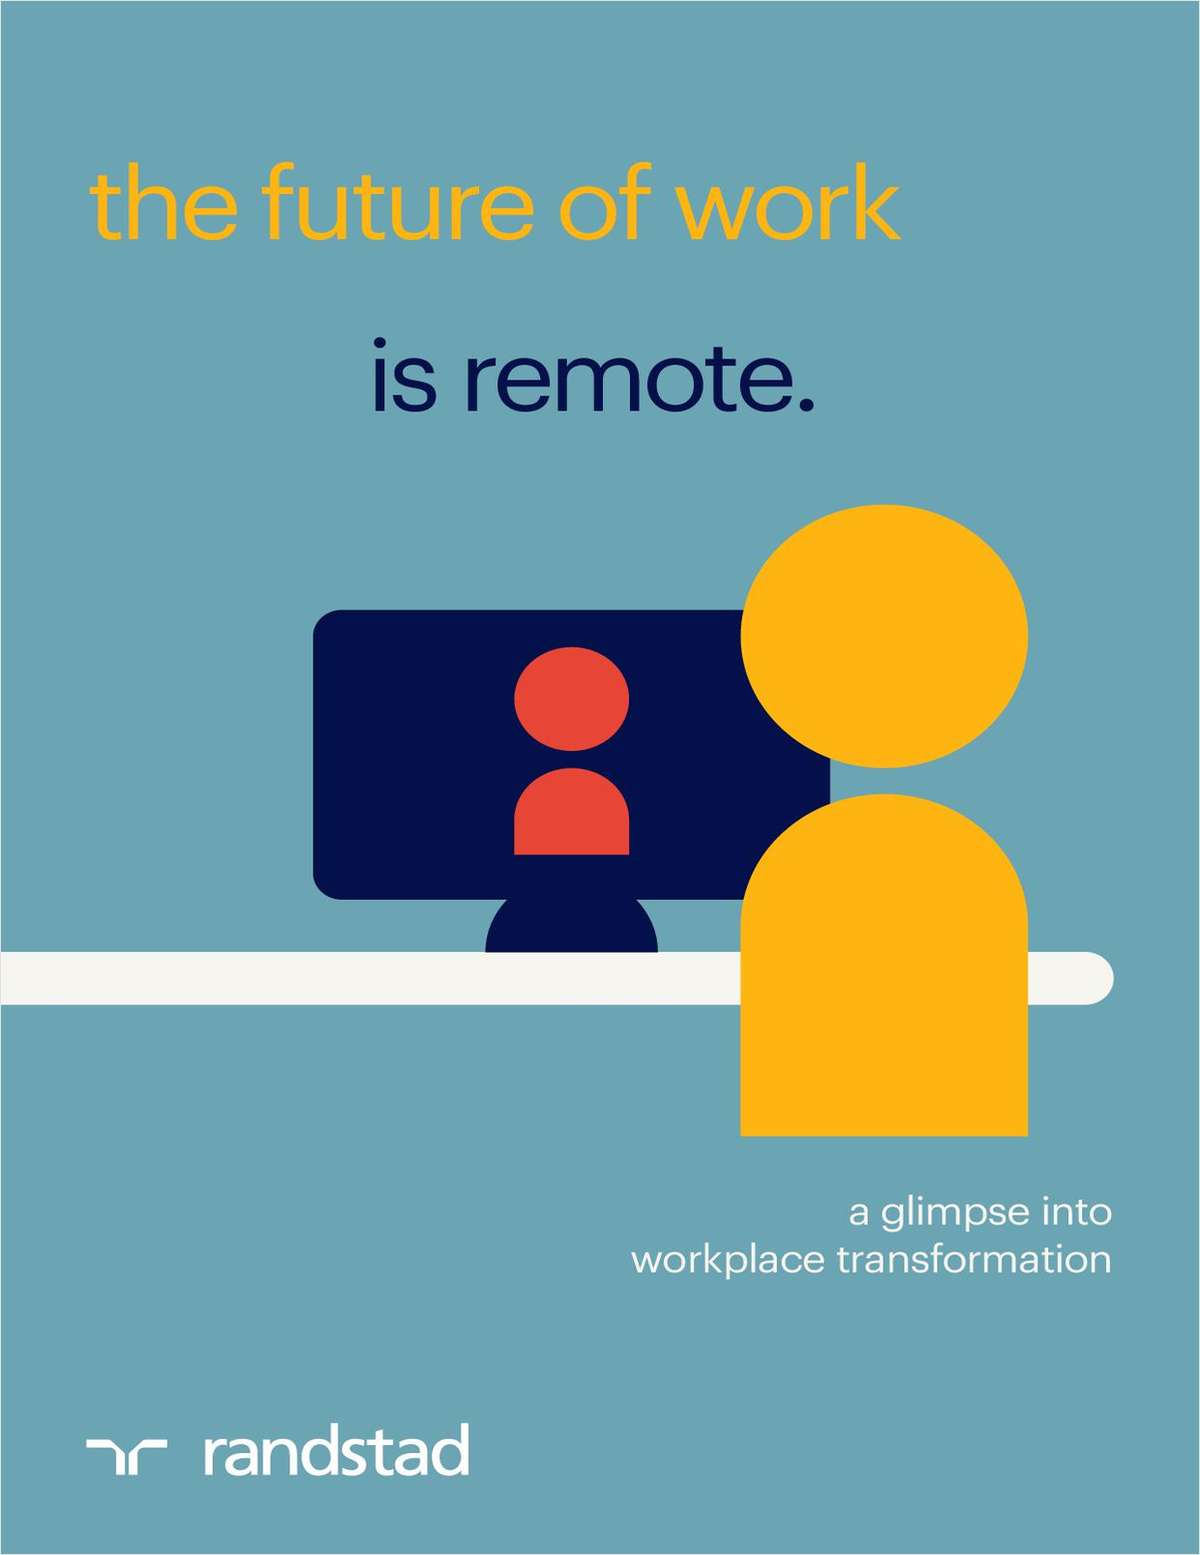 The future of work is remote